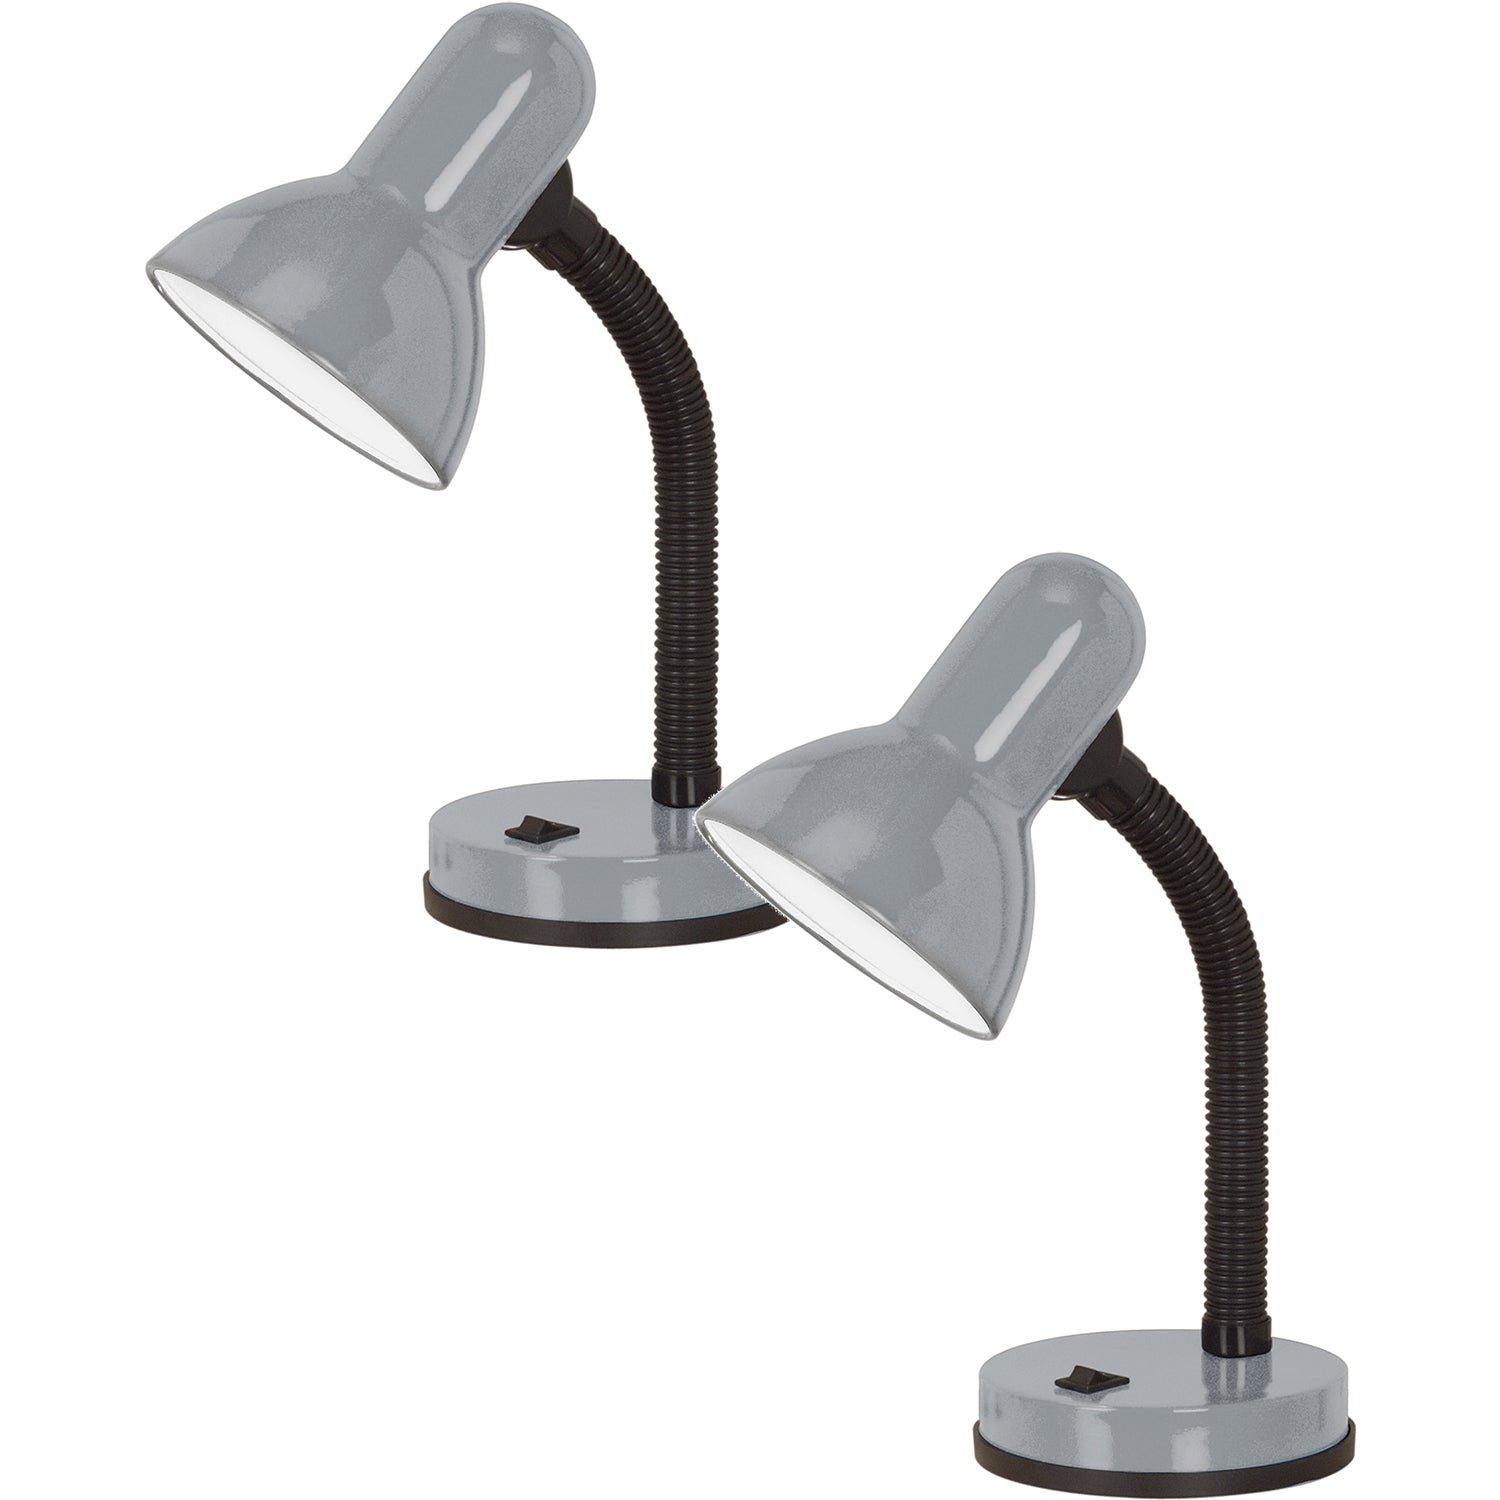 2 PACK Table Lamp Colour Flexible Silver Shade & Base In Line Switch E27 1x40W